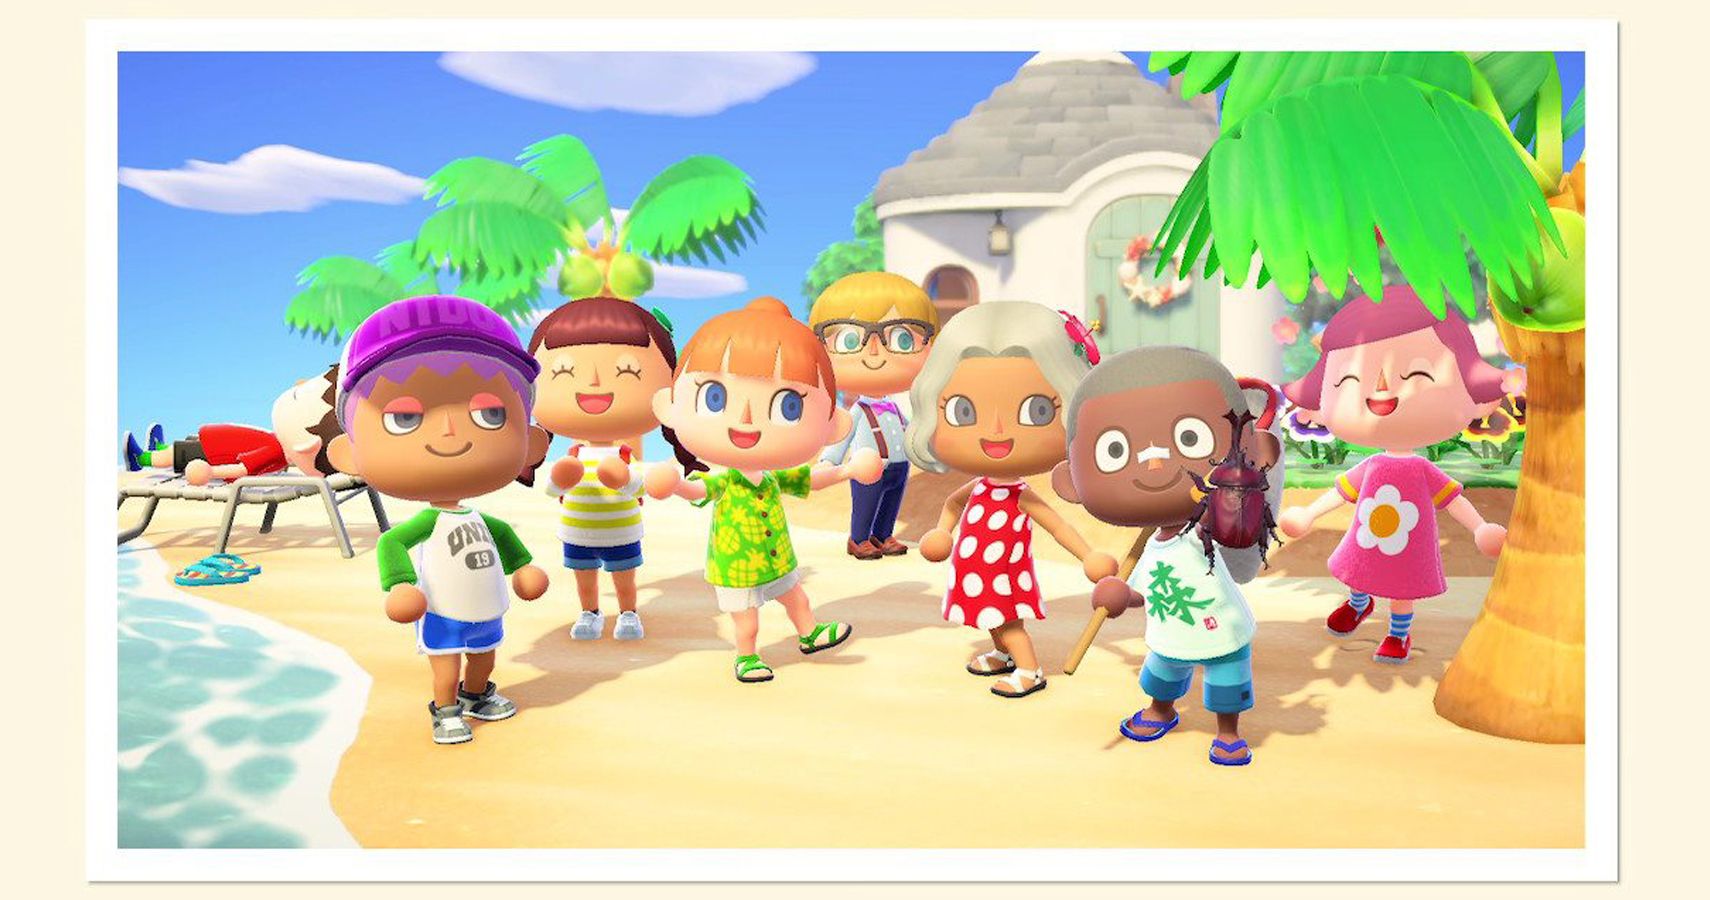 snapshot of happy villagers together on a beach